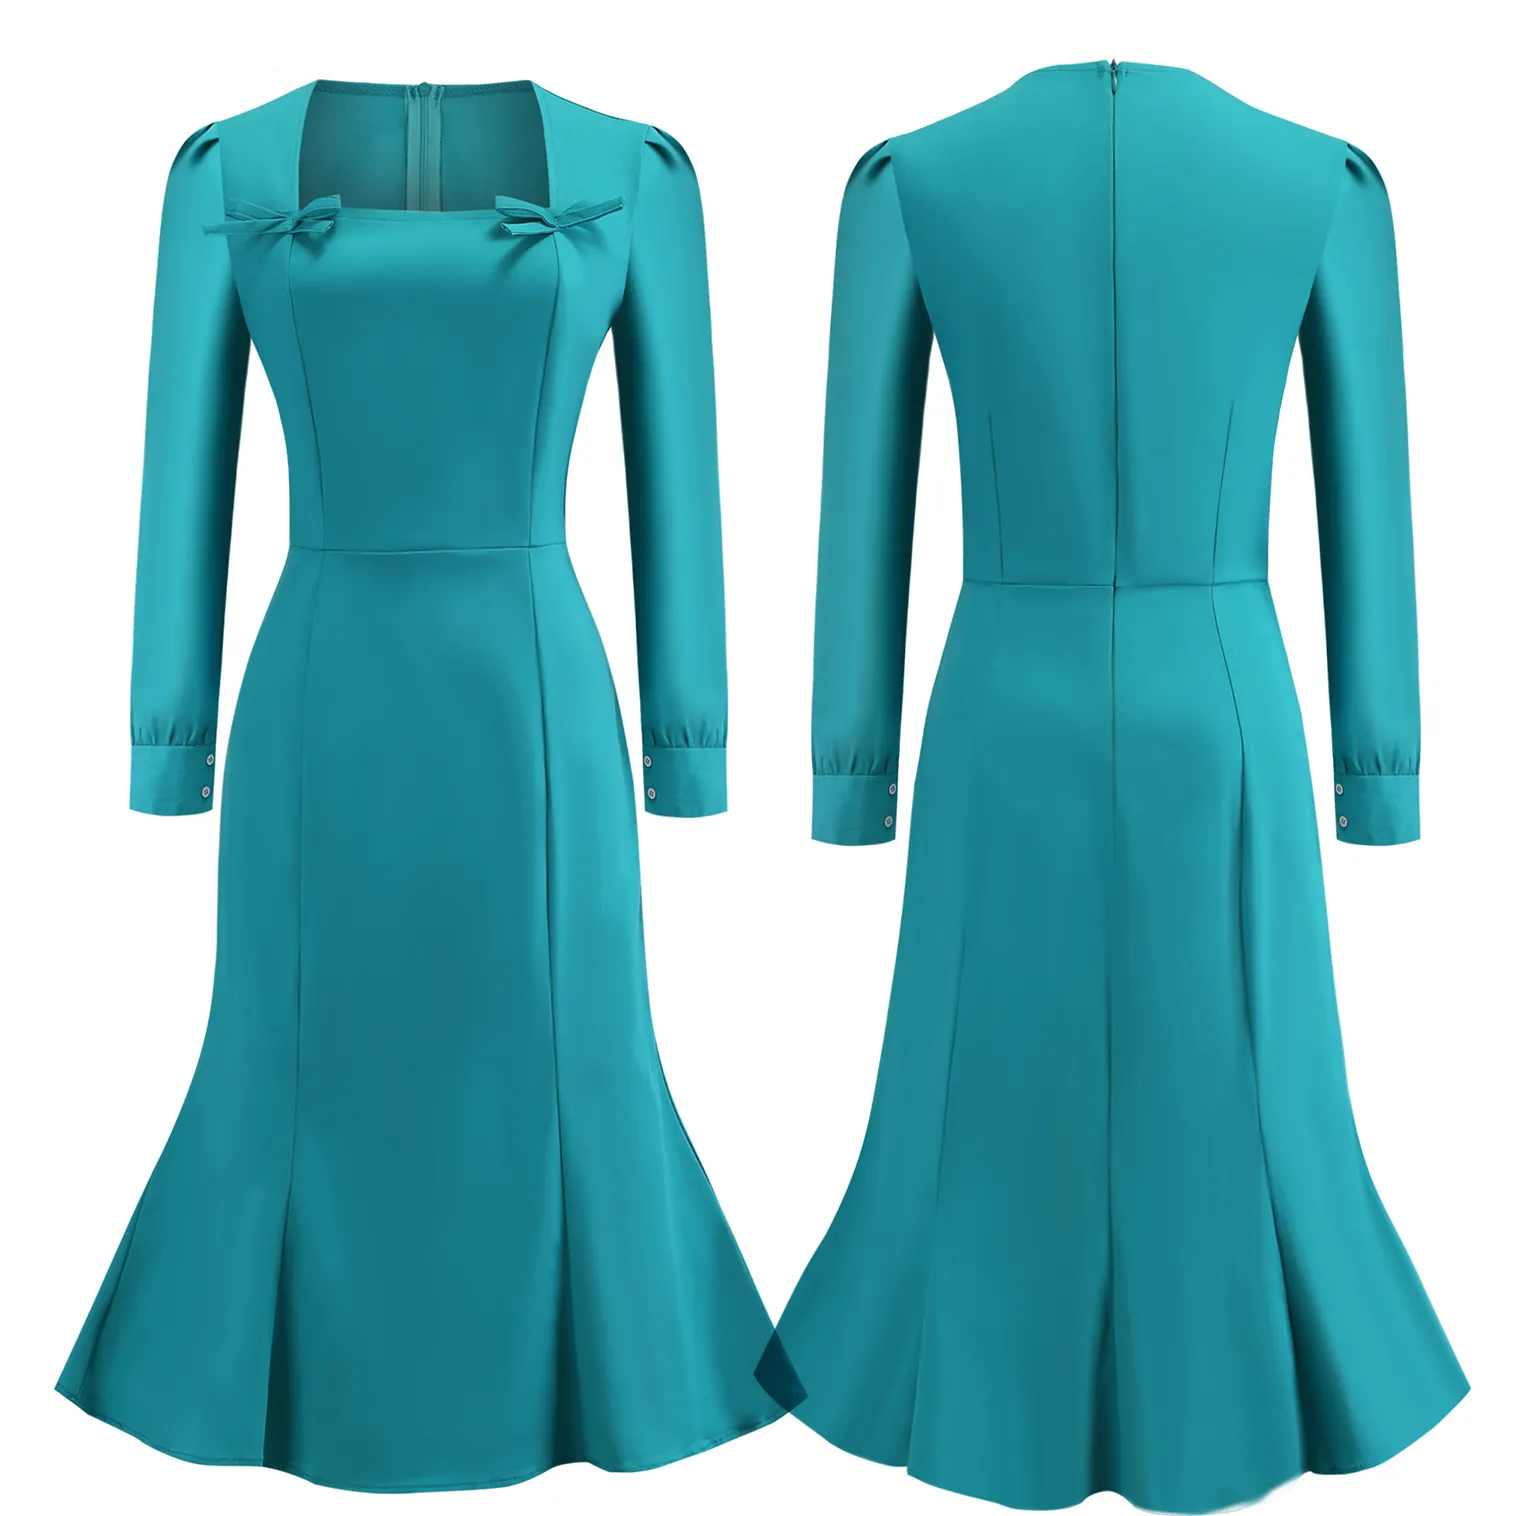 2018 Teal Long Sleeves Work Dresses Square Neck Solid Color with Bow Cotton Women Mermaid Vintage Pencil Dress FS6141